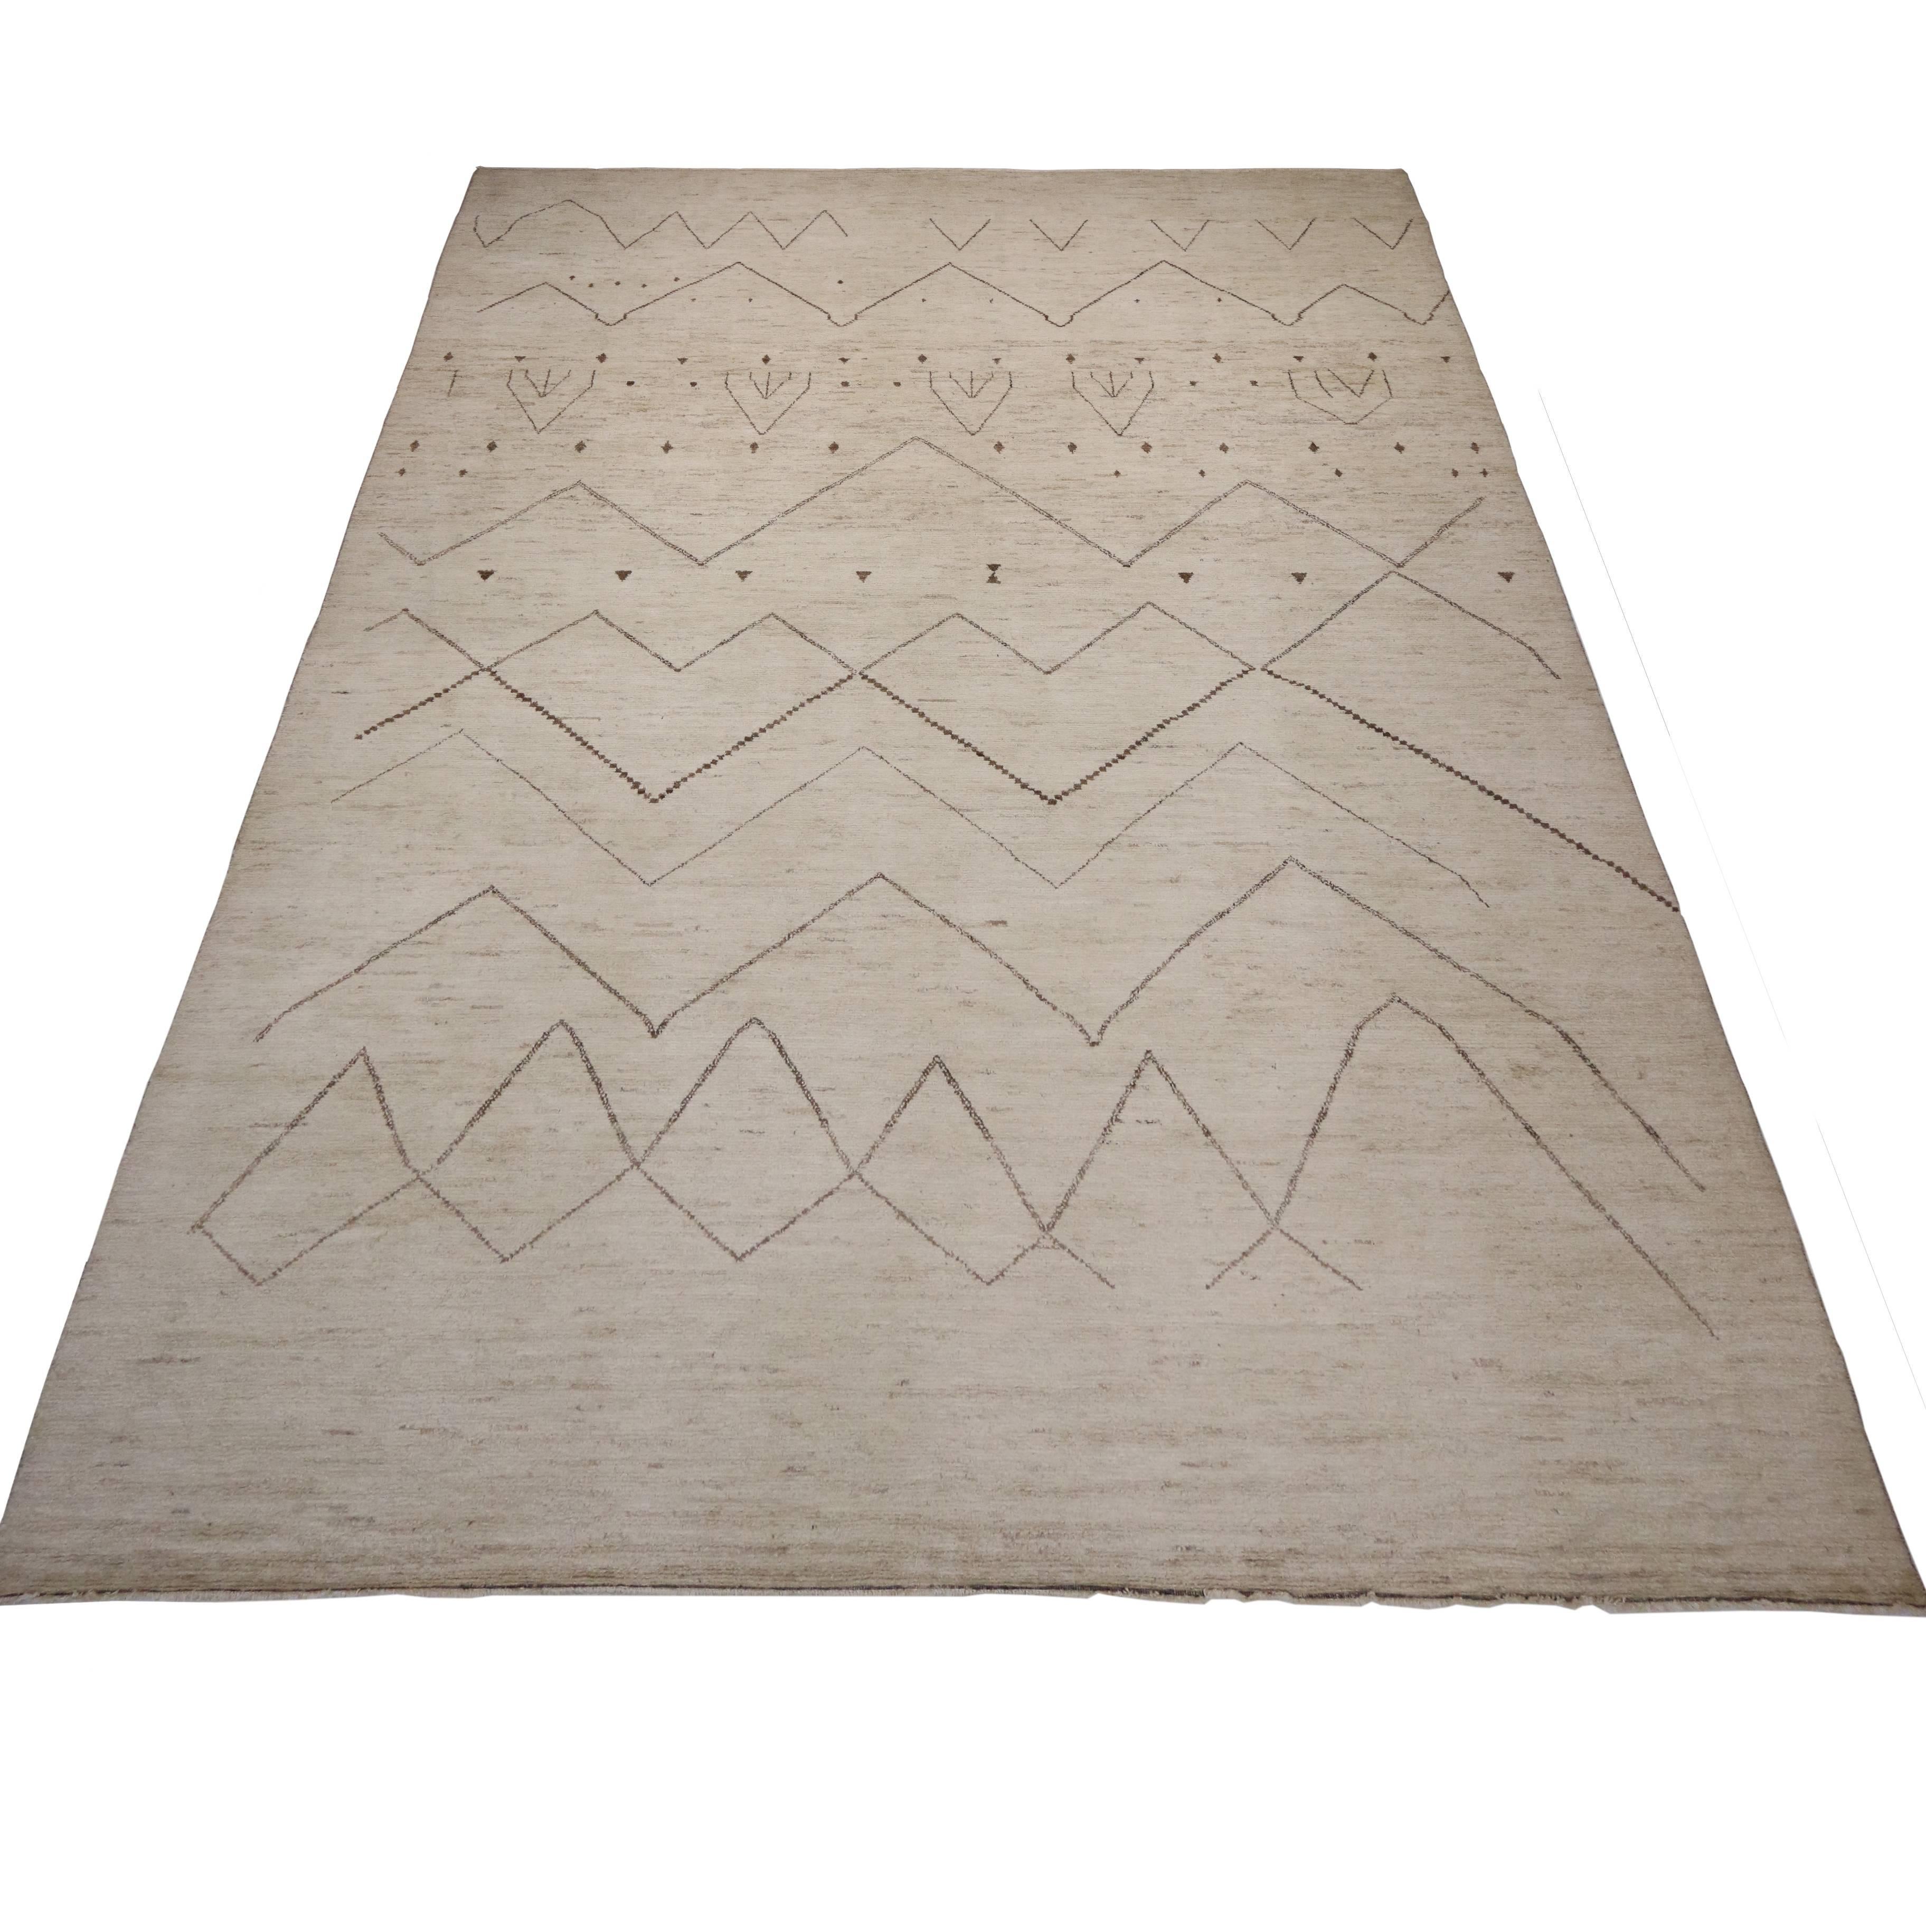 Pakistani Contemporary Moroccan Style Oversize Rug with Tribal Design